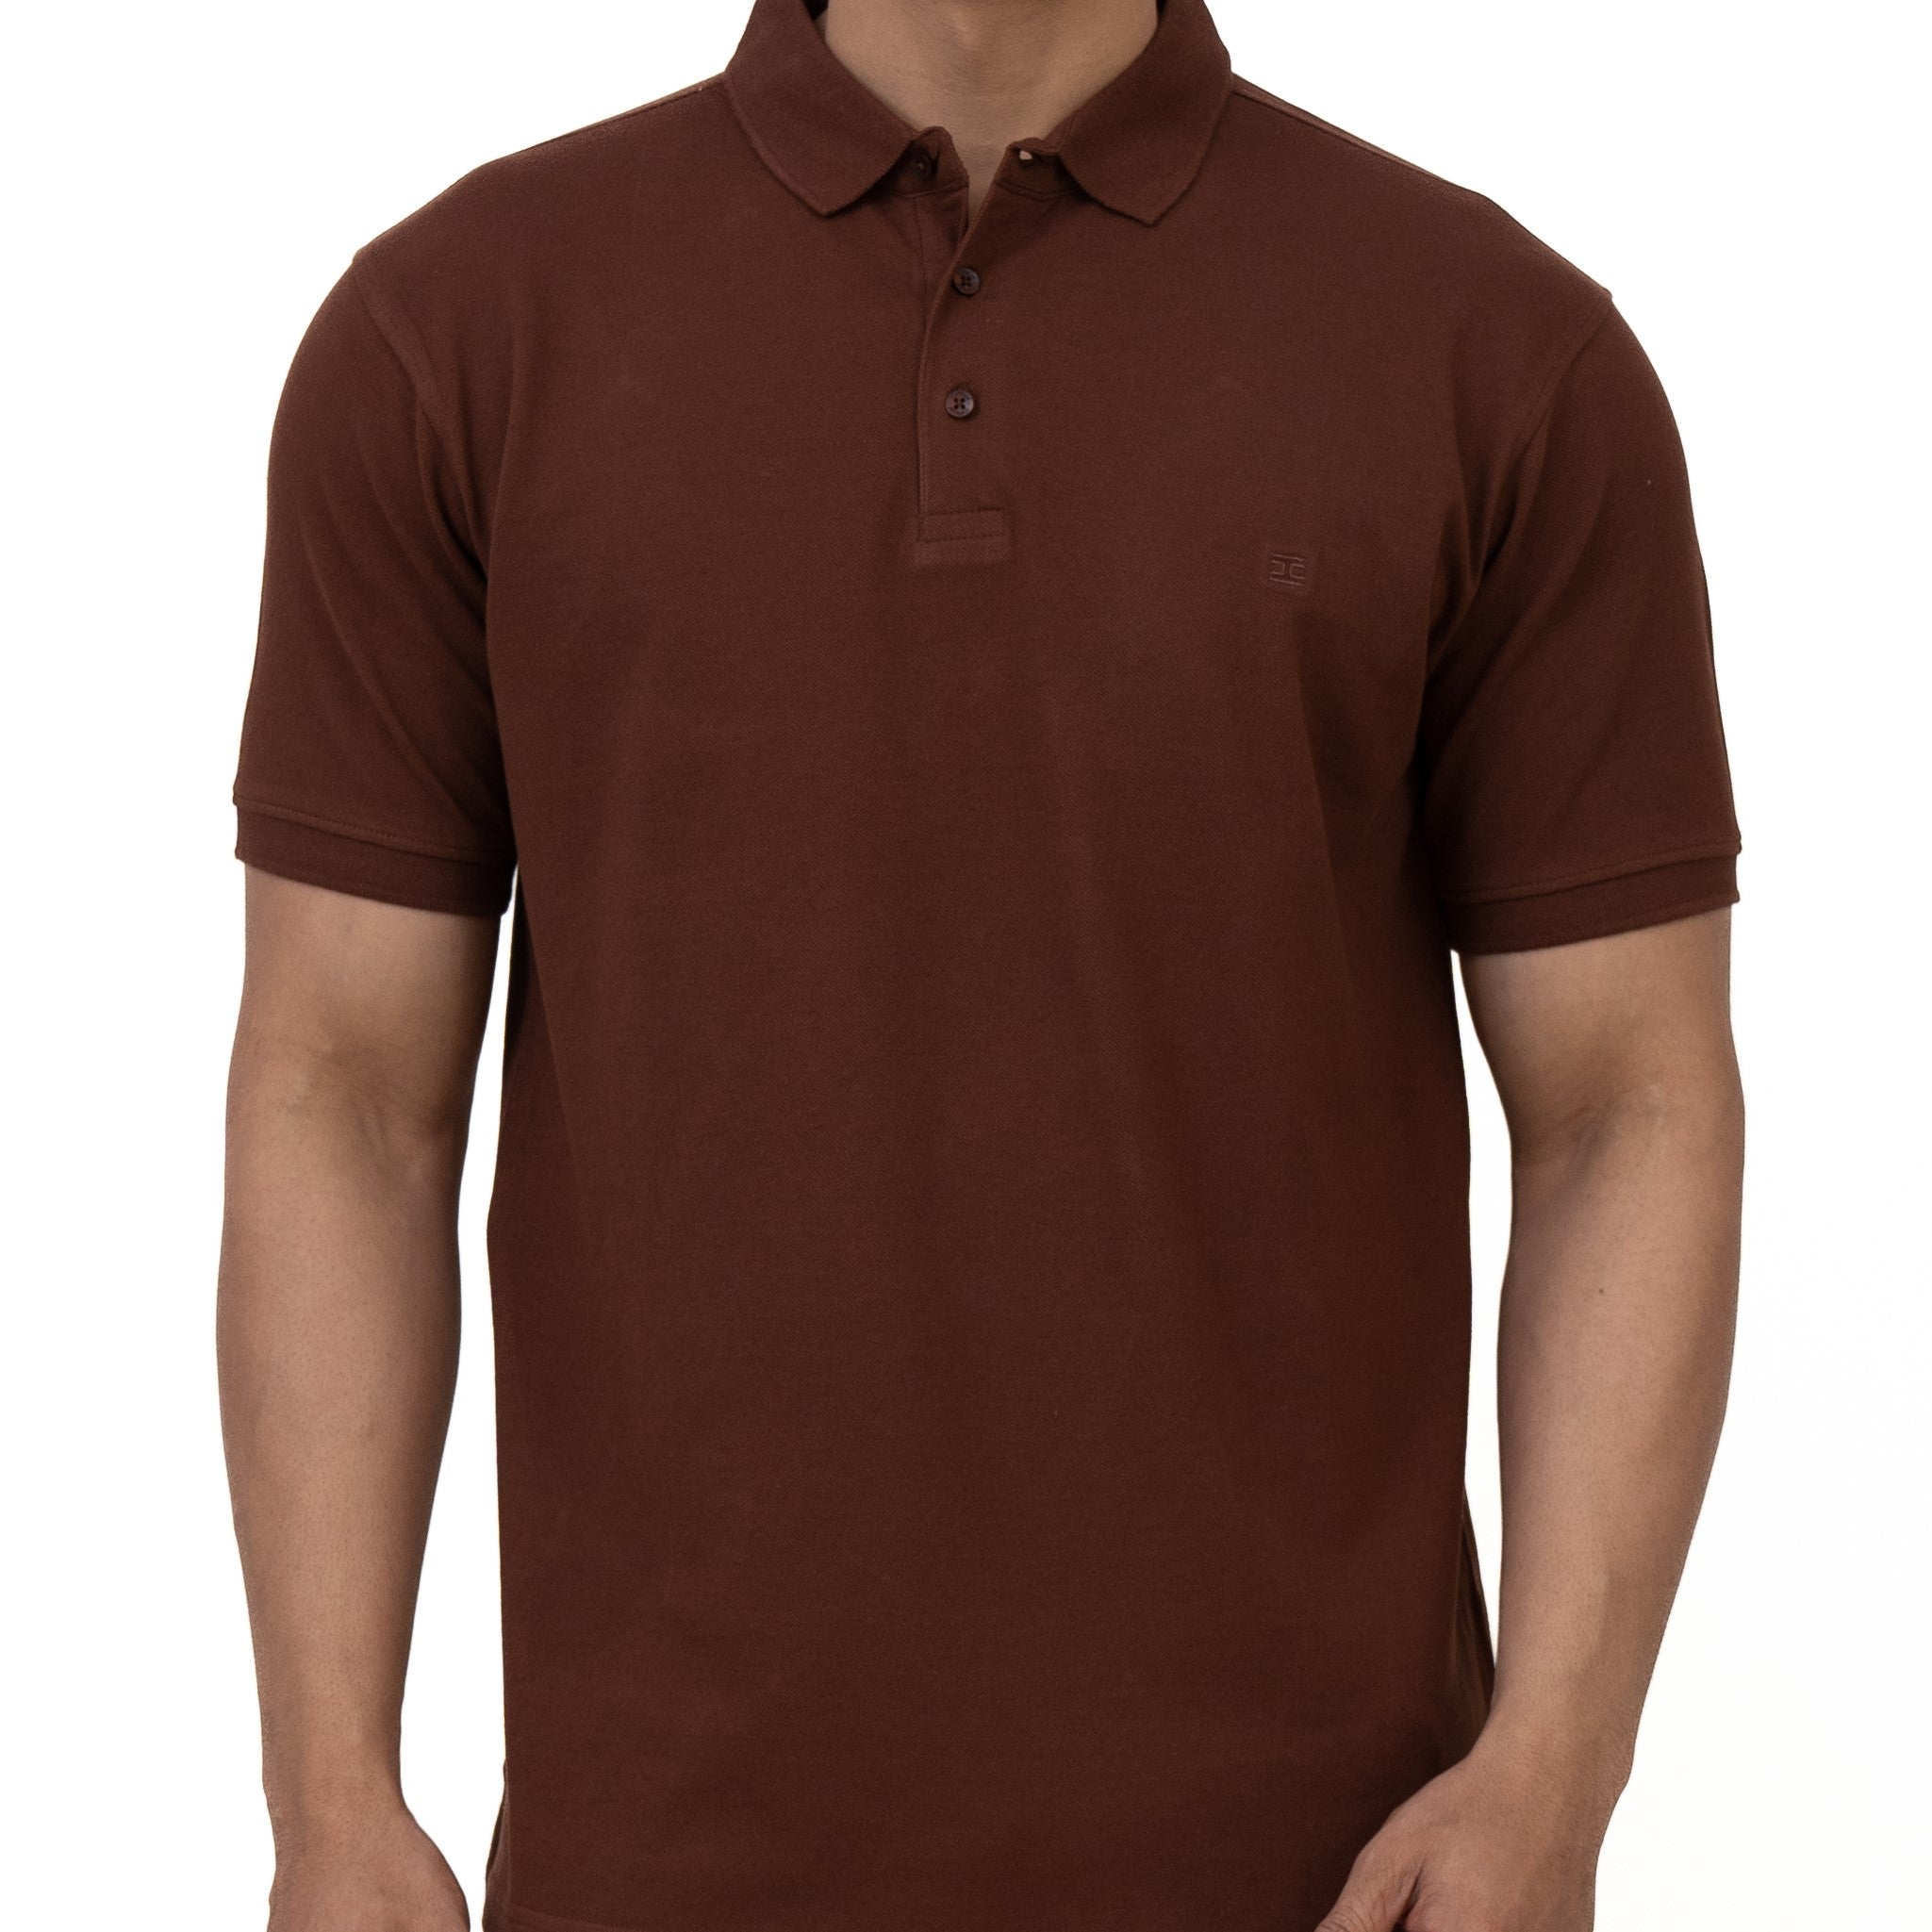 Cotstyle Cotton Fabrics Polo Short Length Plain Half Sleeve Casual & Daily Wear Men's T Shirts - Pack of 1 - Brown Colour